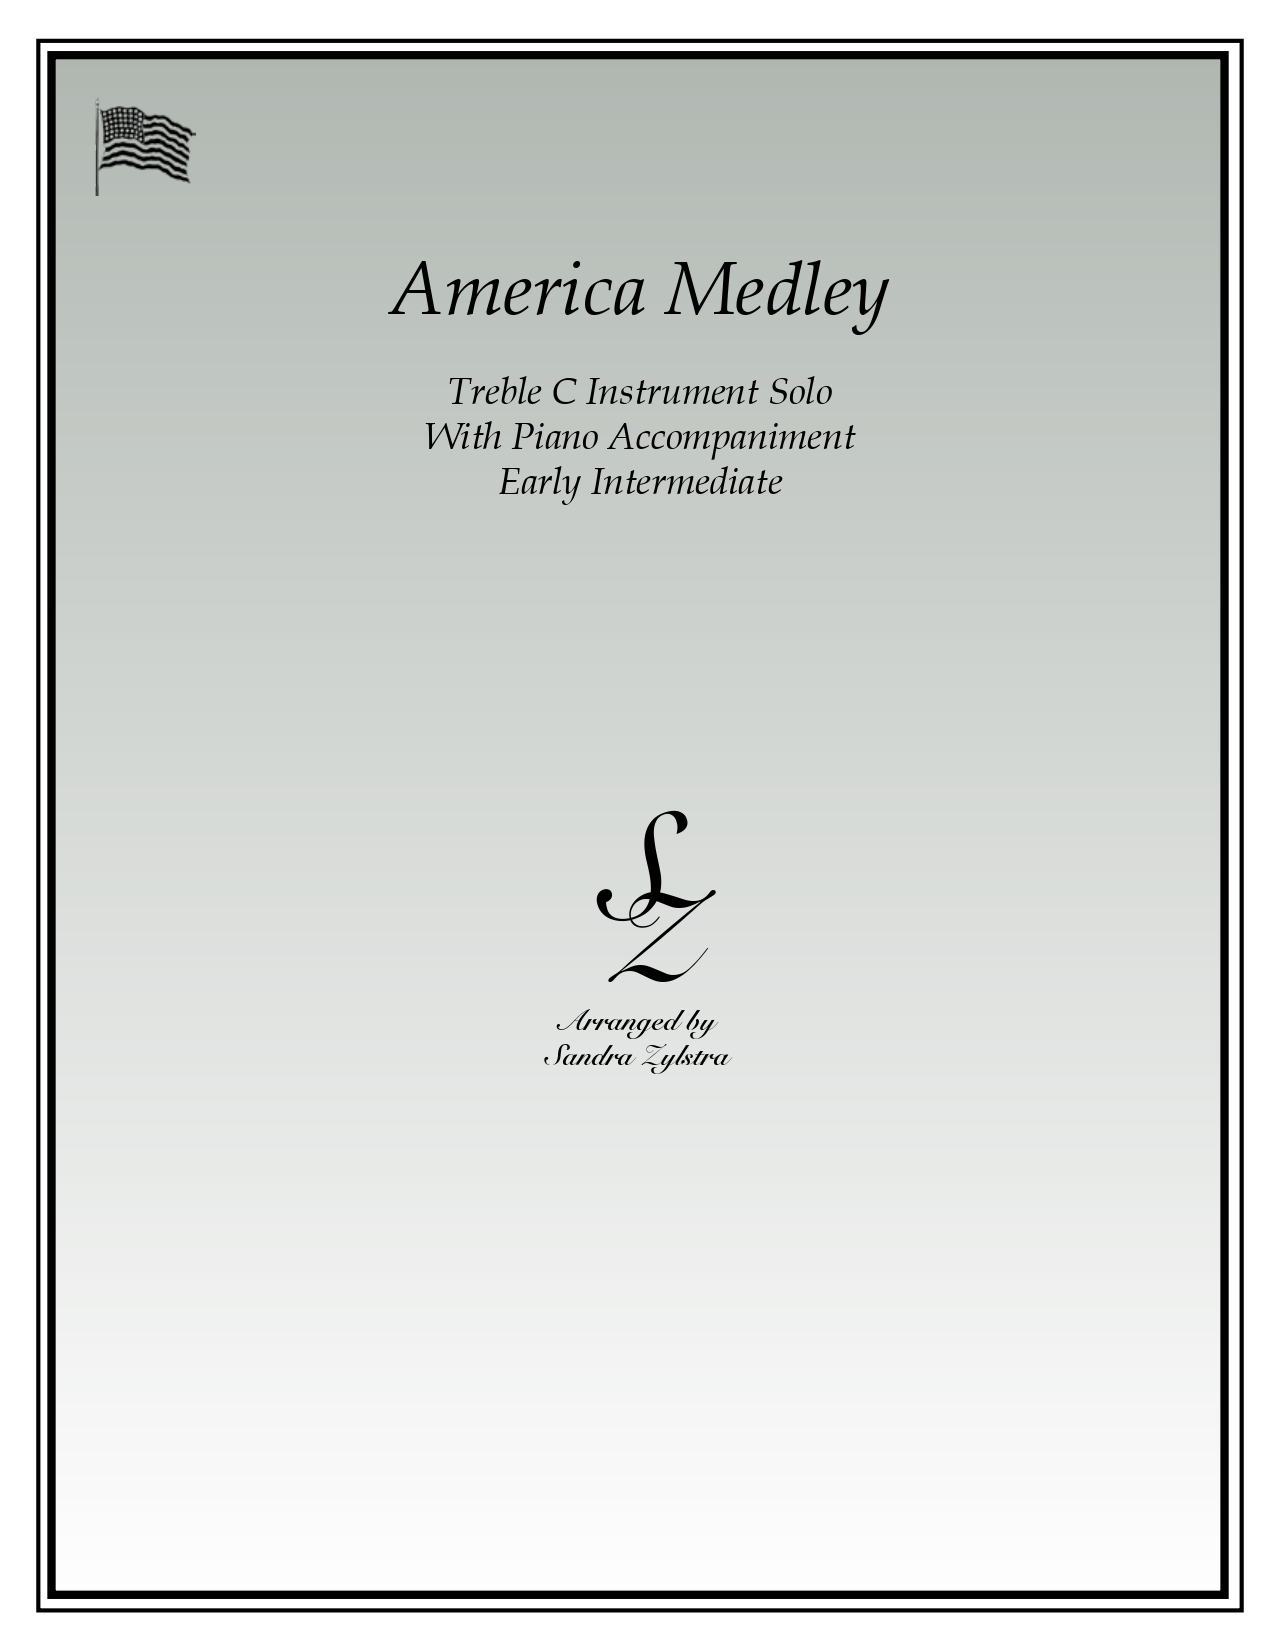 America Medley treble C instrument solo part cover page 00011